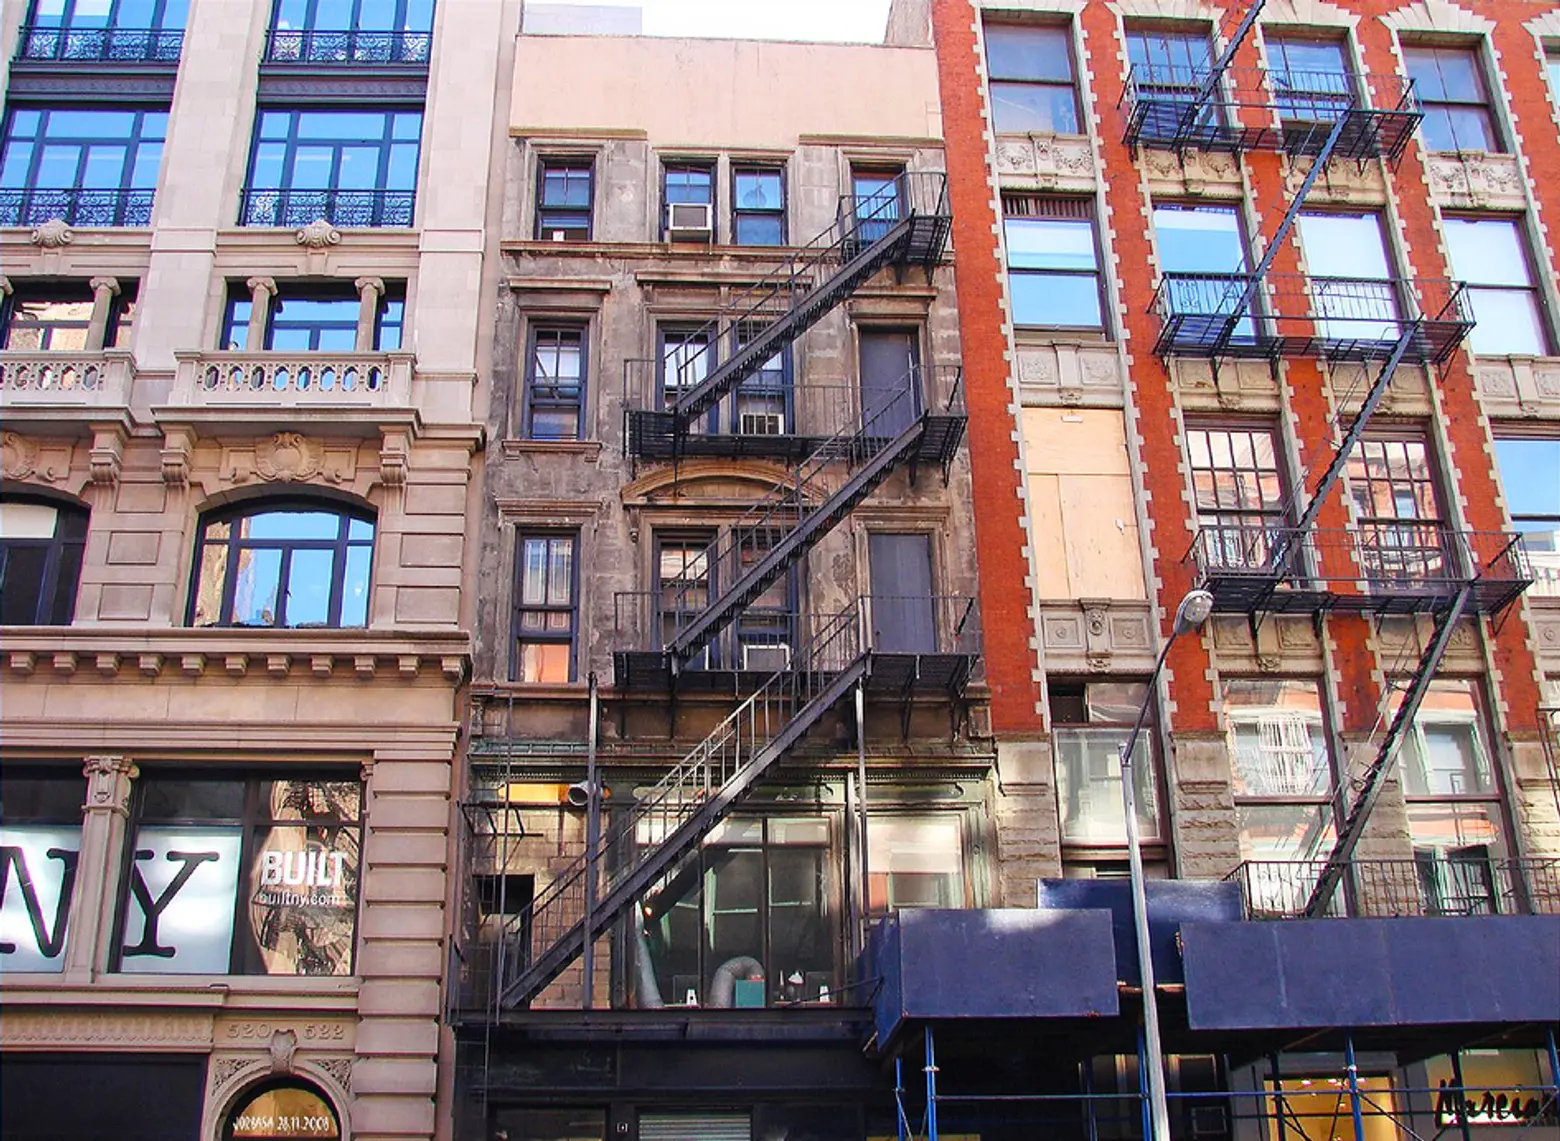 Rent Guidelines Board recommends increases between 2.7% and 9% for rent-stabilized units